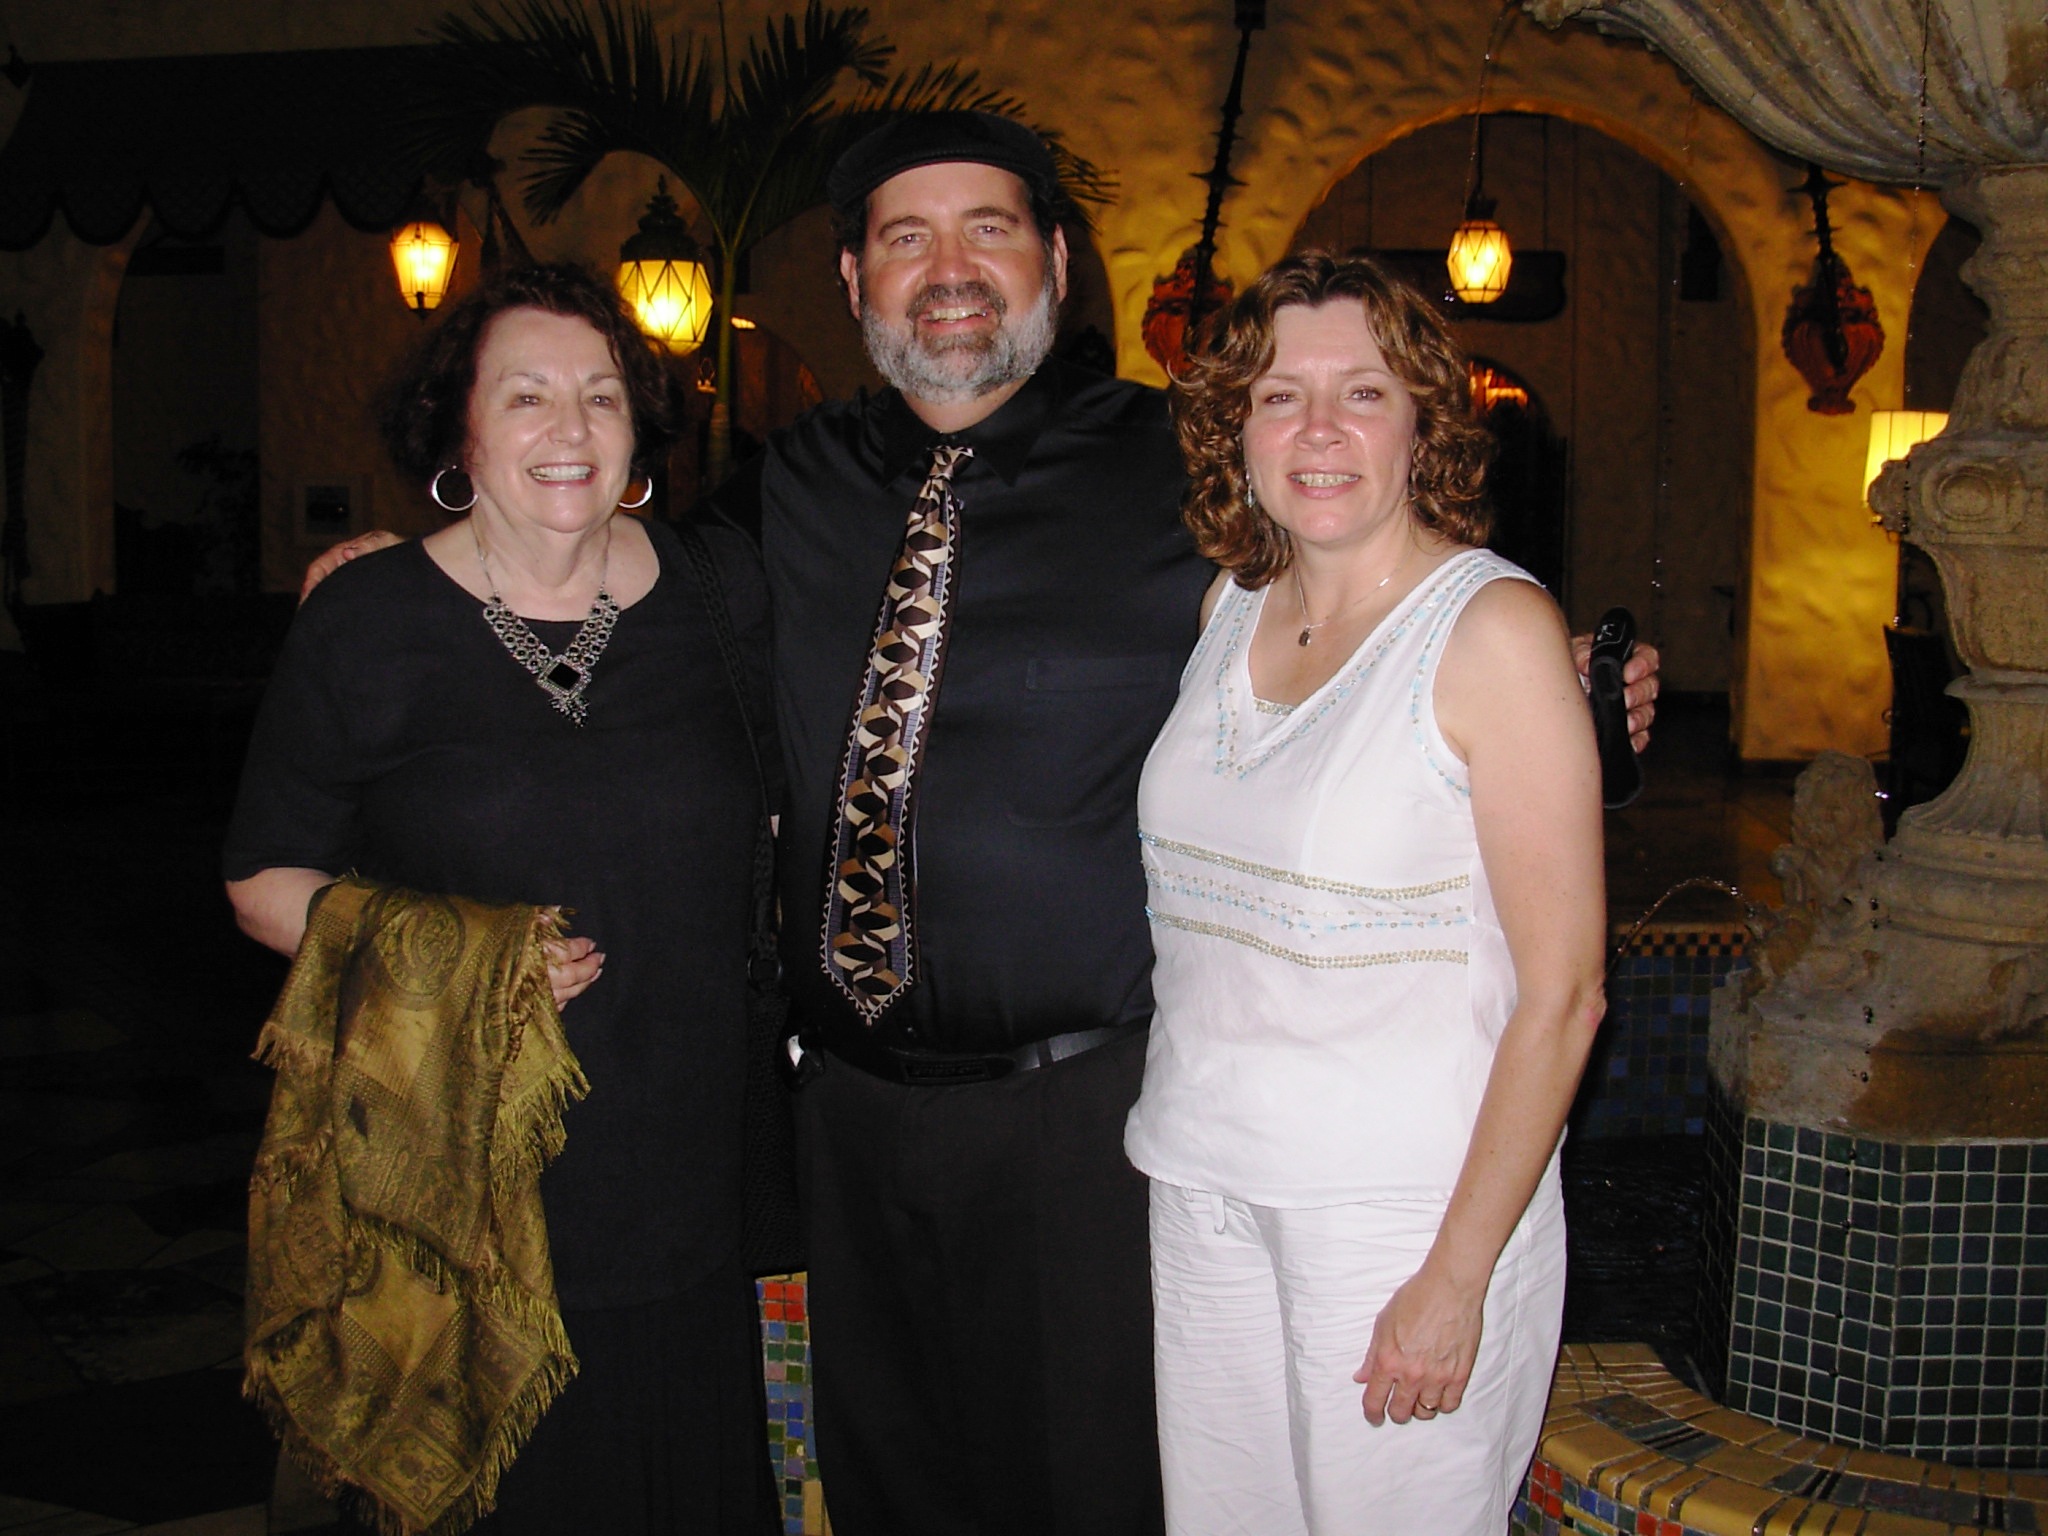 Hotel Hershey..the Wise Guy with Mom Arlene , and wife Pam after a Veranda show
